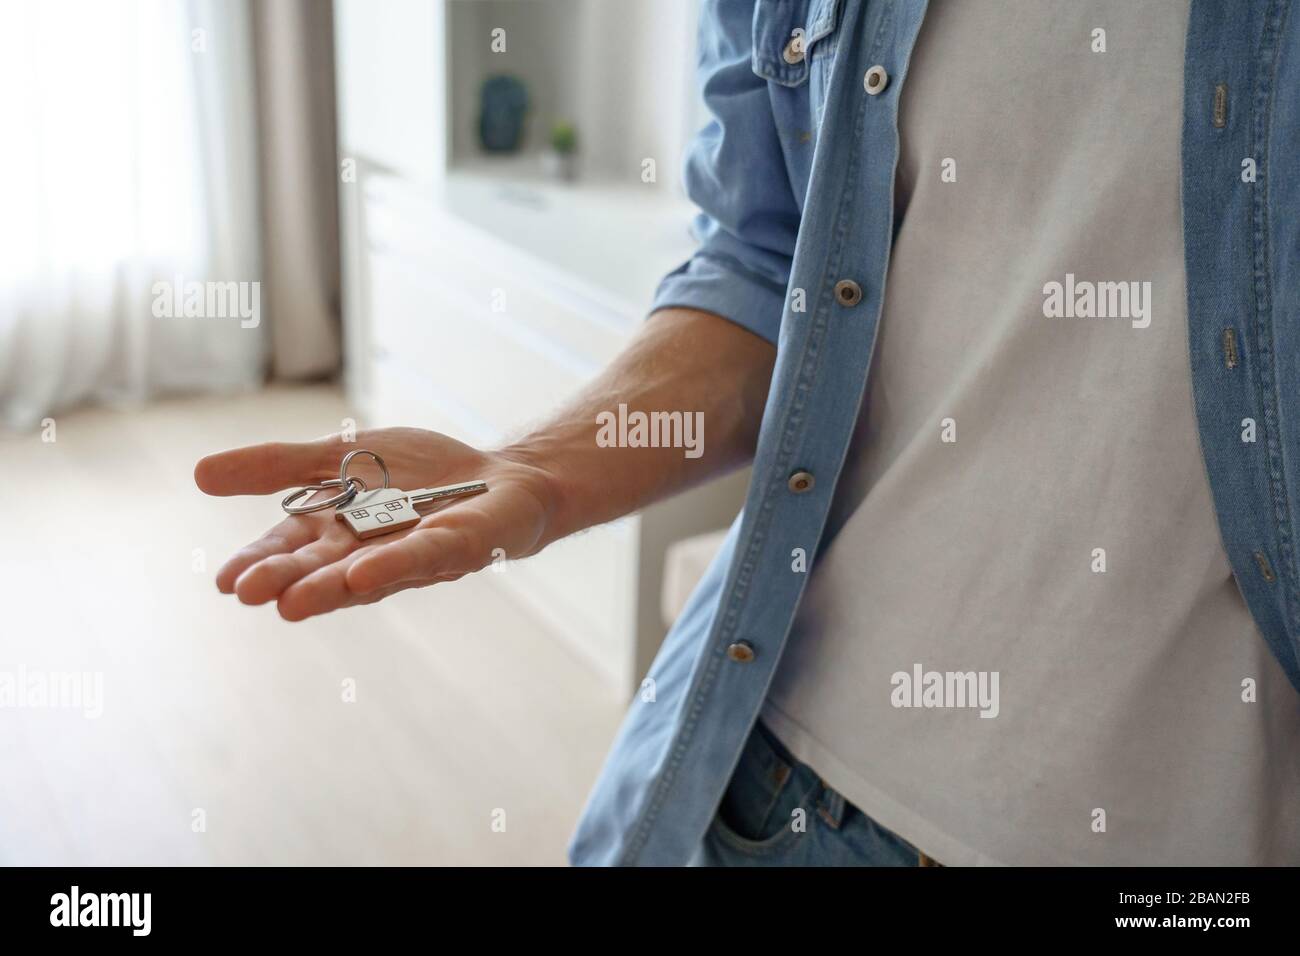 Young man renter first time home owner holding key to new apartment on hand. Stock Photo